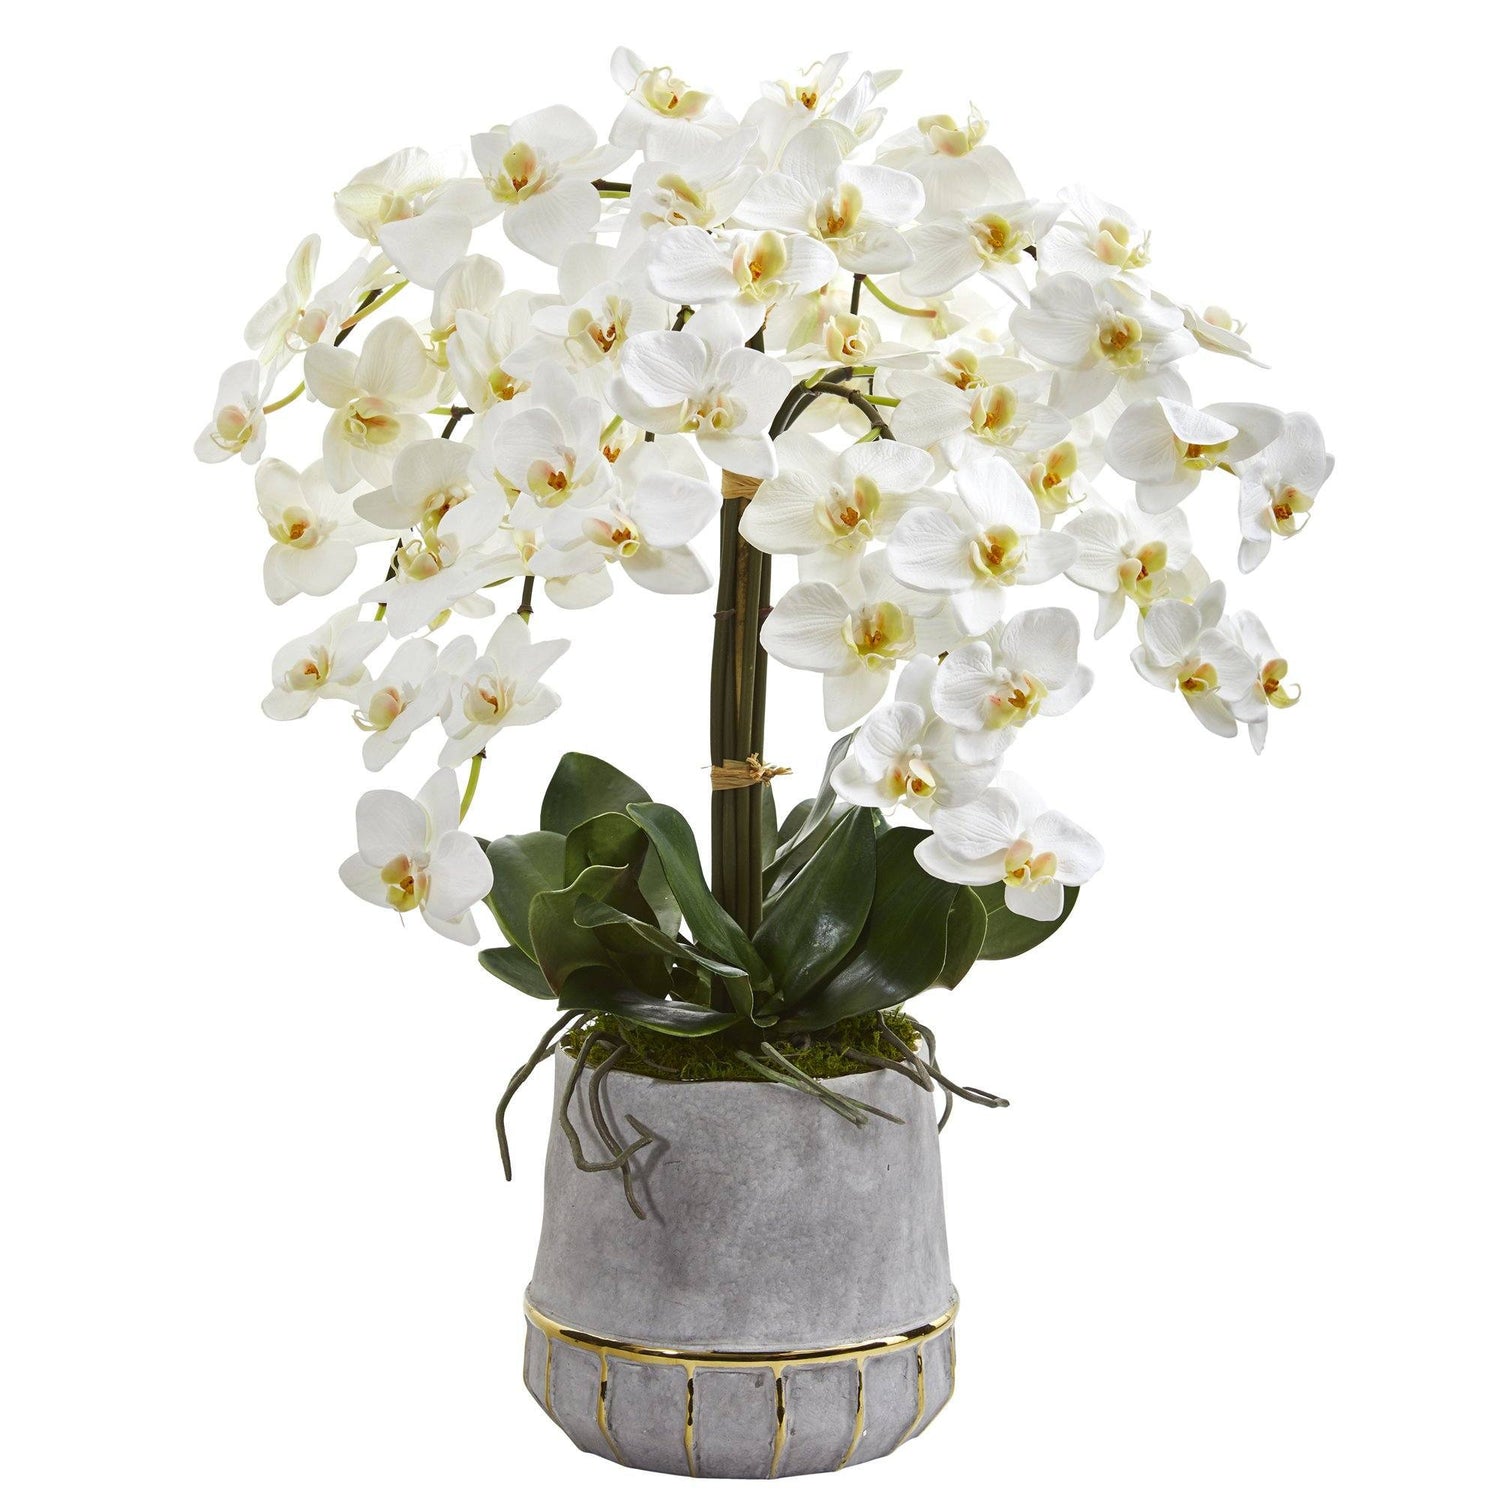 26” Phalaenopsis Orchid Artificial Arrangement in Stoneware Vase with Gold Trimming